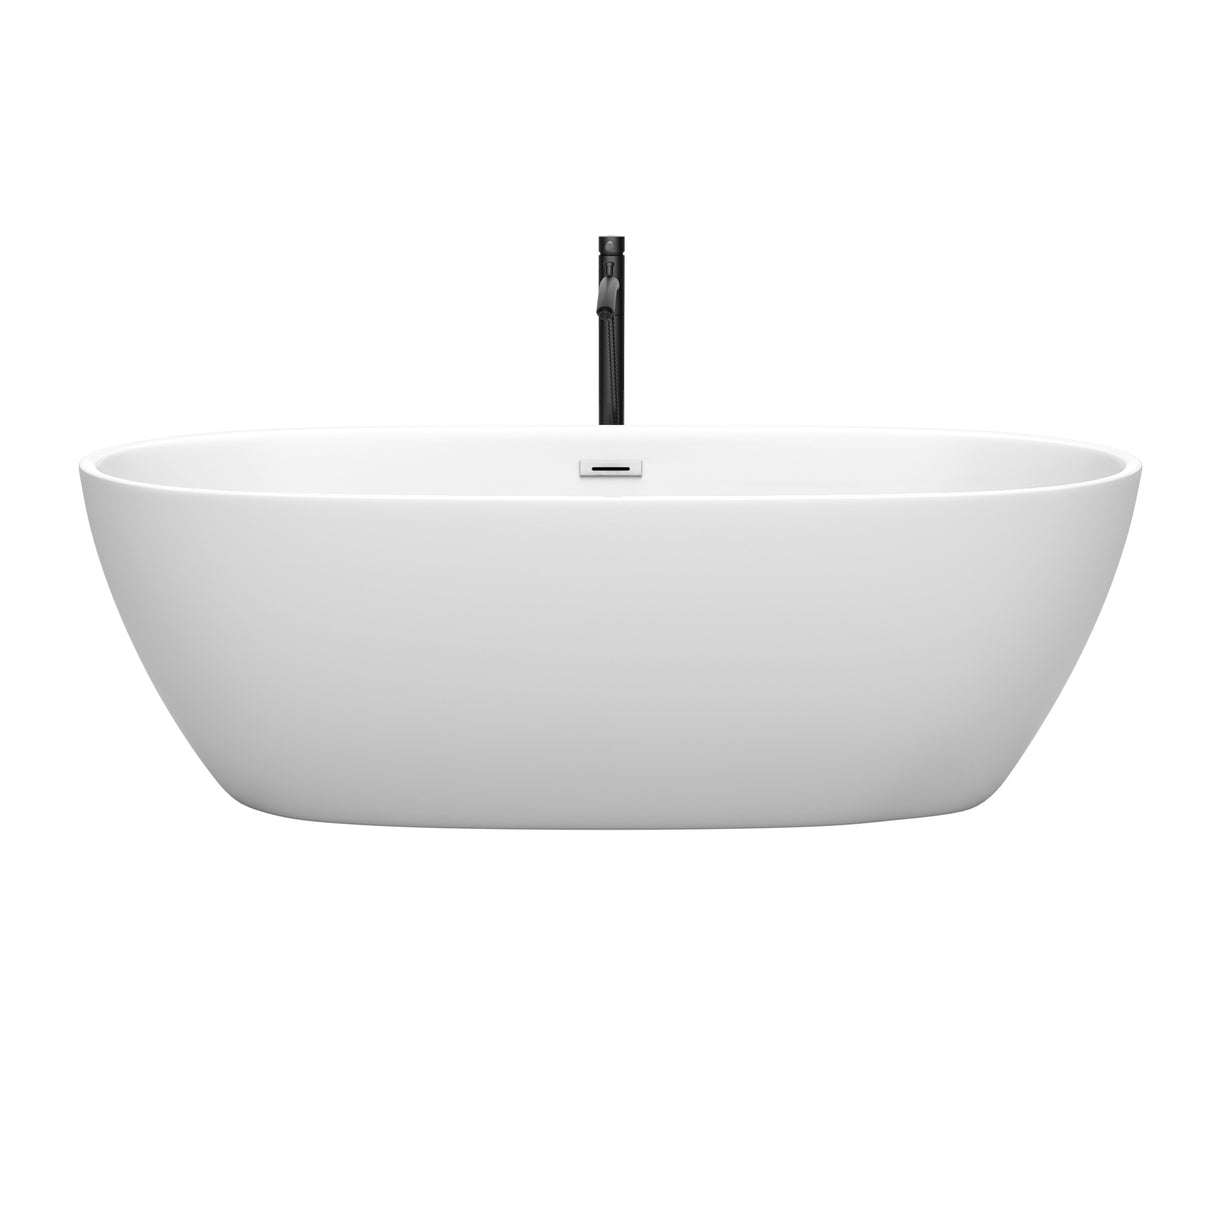 Juno 71 Inch Freestanding Bathtub in Matte White with Polished Chrome Trim and Floor Mounted Faucet in Matte Black